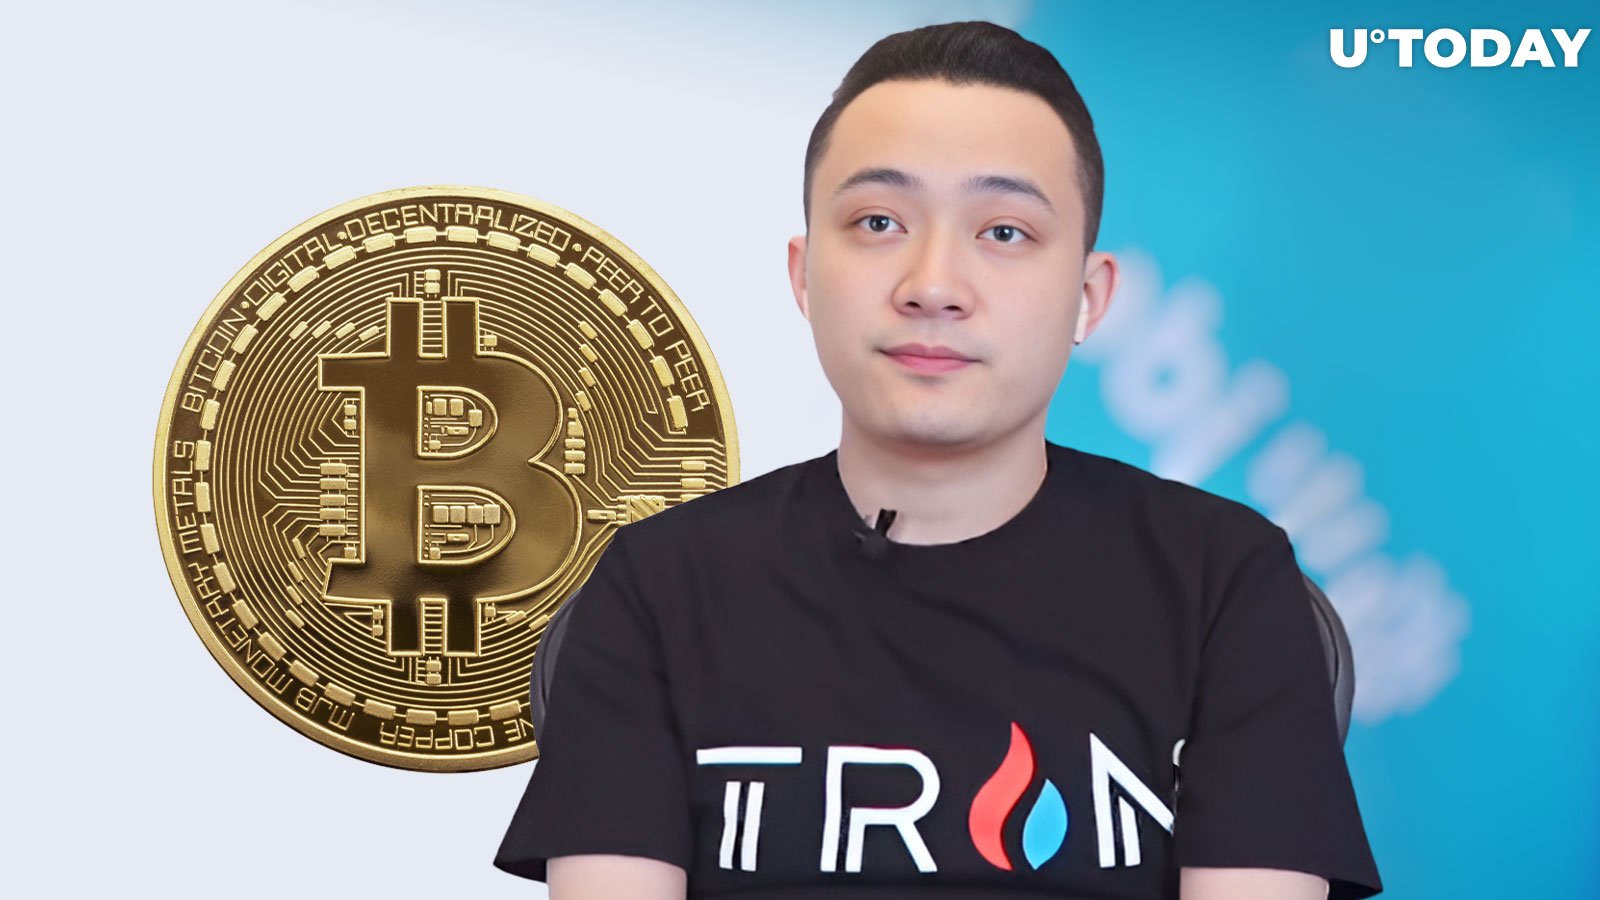 Tron Founder Justin Sun Issues Massive Prediction After Landmark Bitcoin ETF Approval